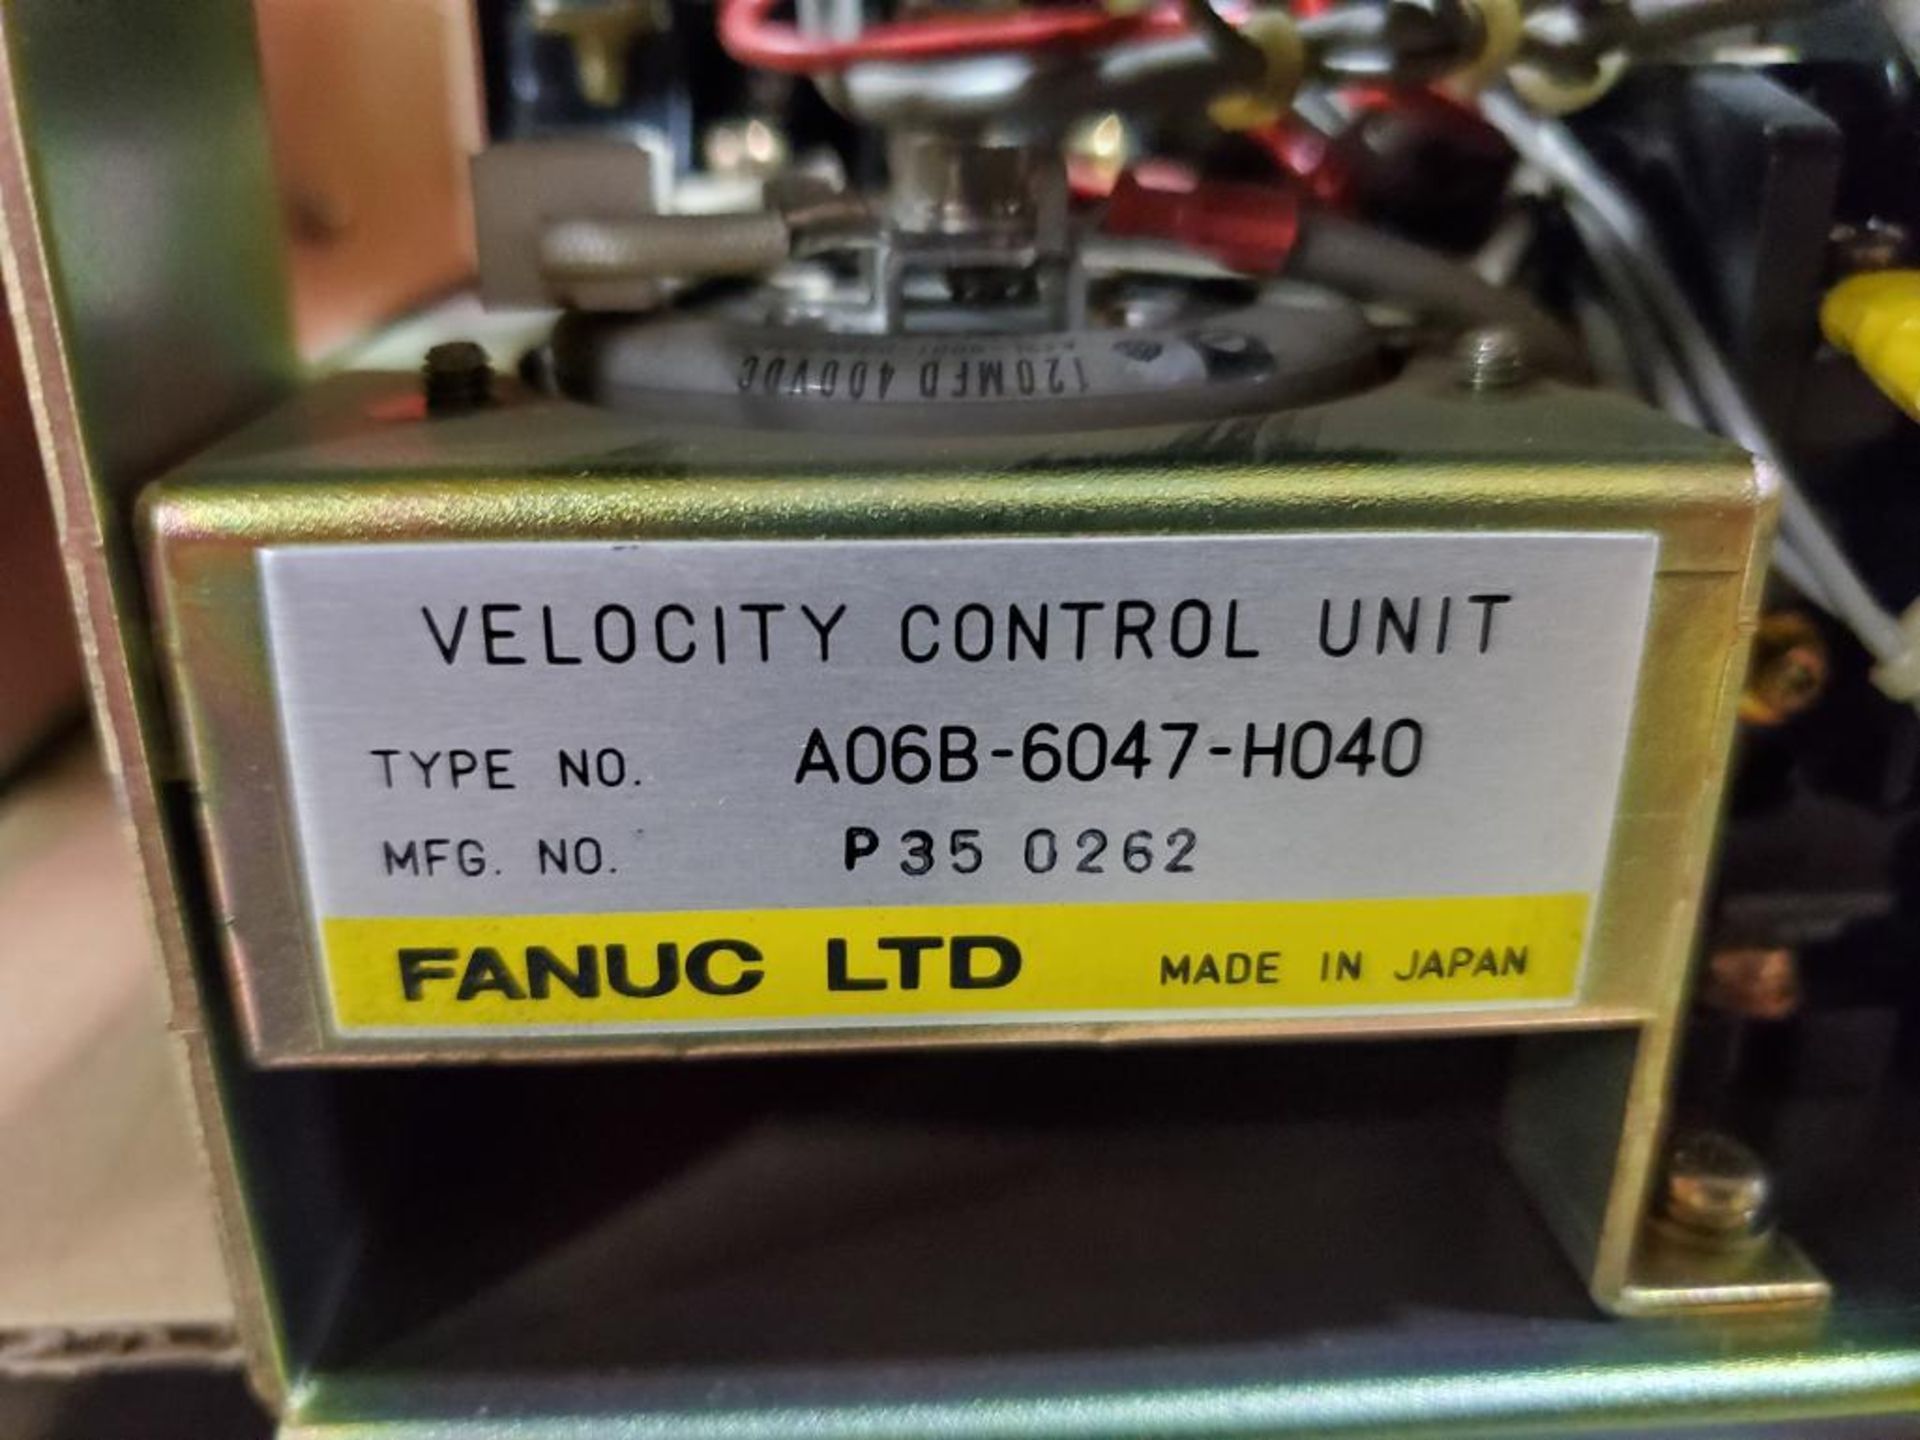 Fanuc velocity control unit. Part number A06B-6047-H040. - Image 5 of 5